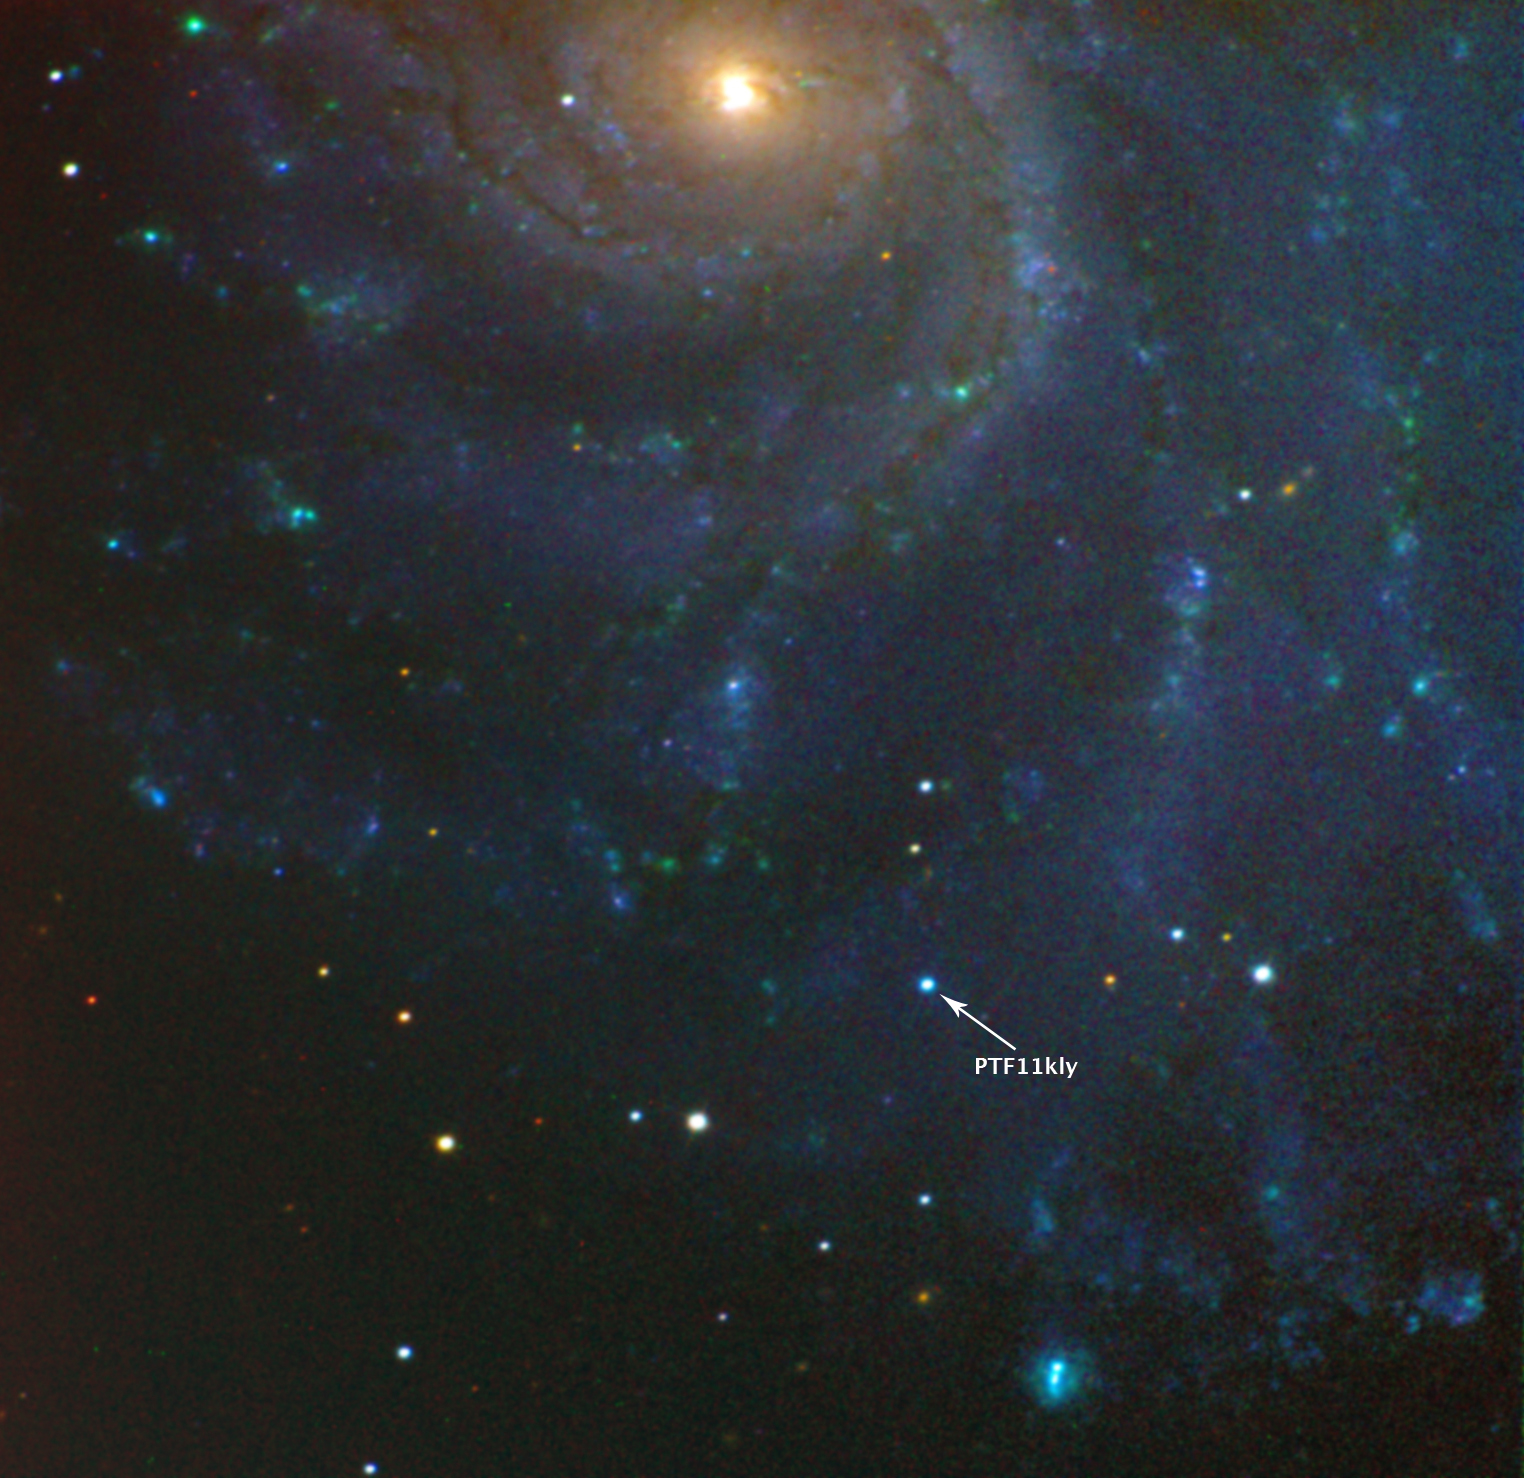 A Young Supernova in the Nearby Pinwheel Galaxy